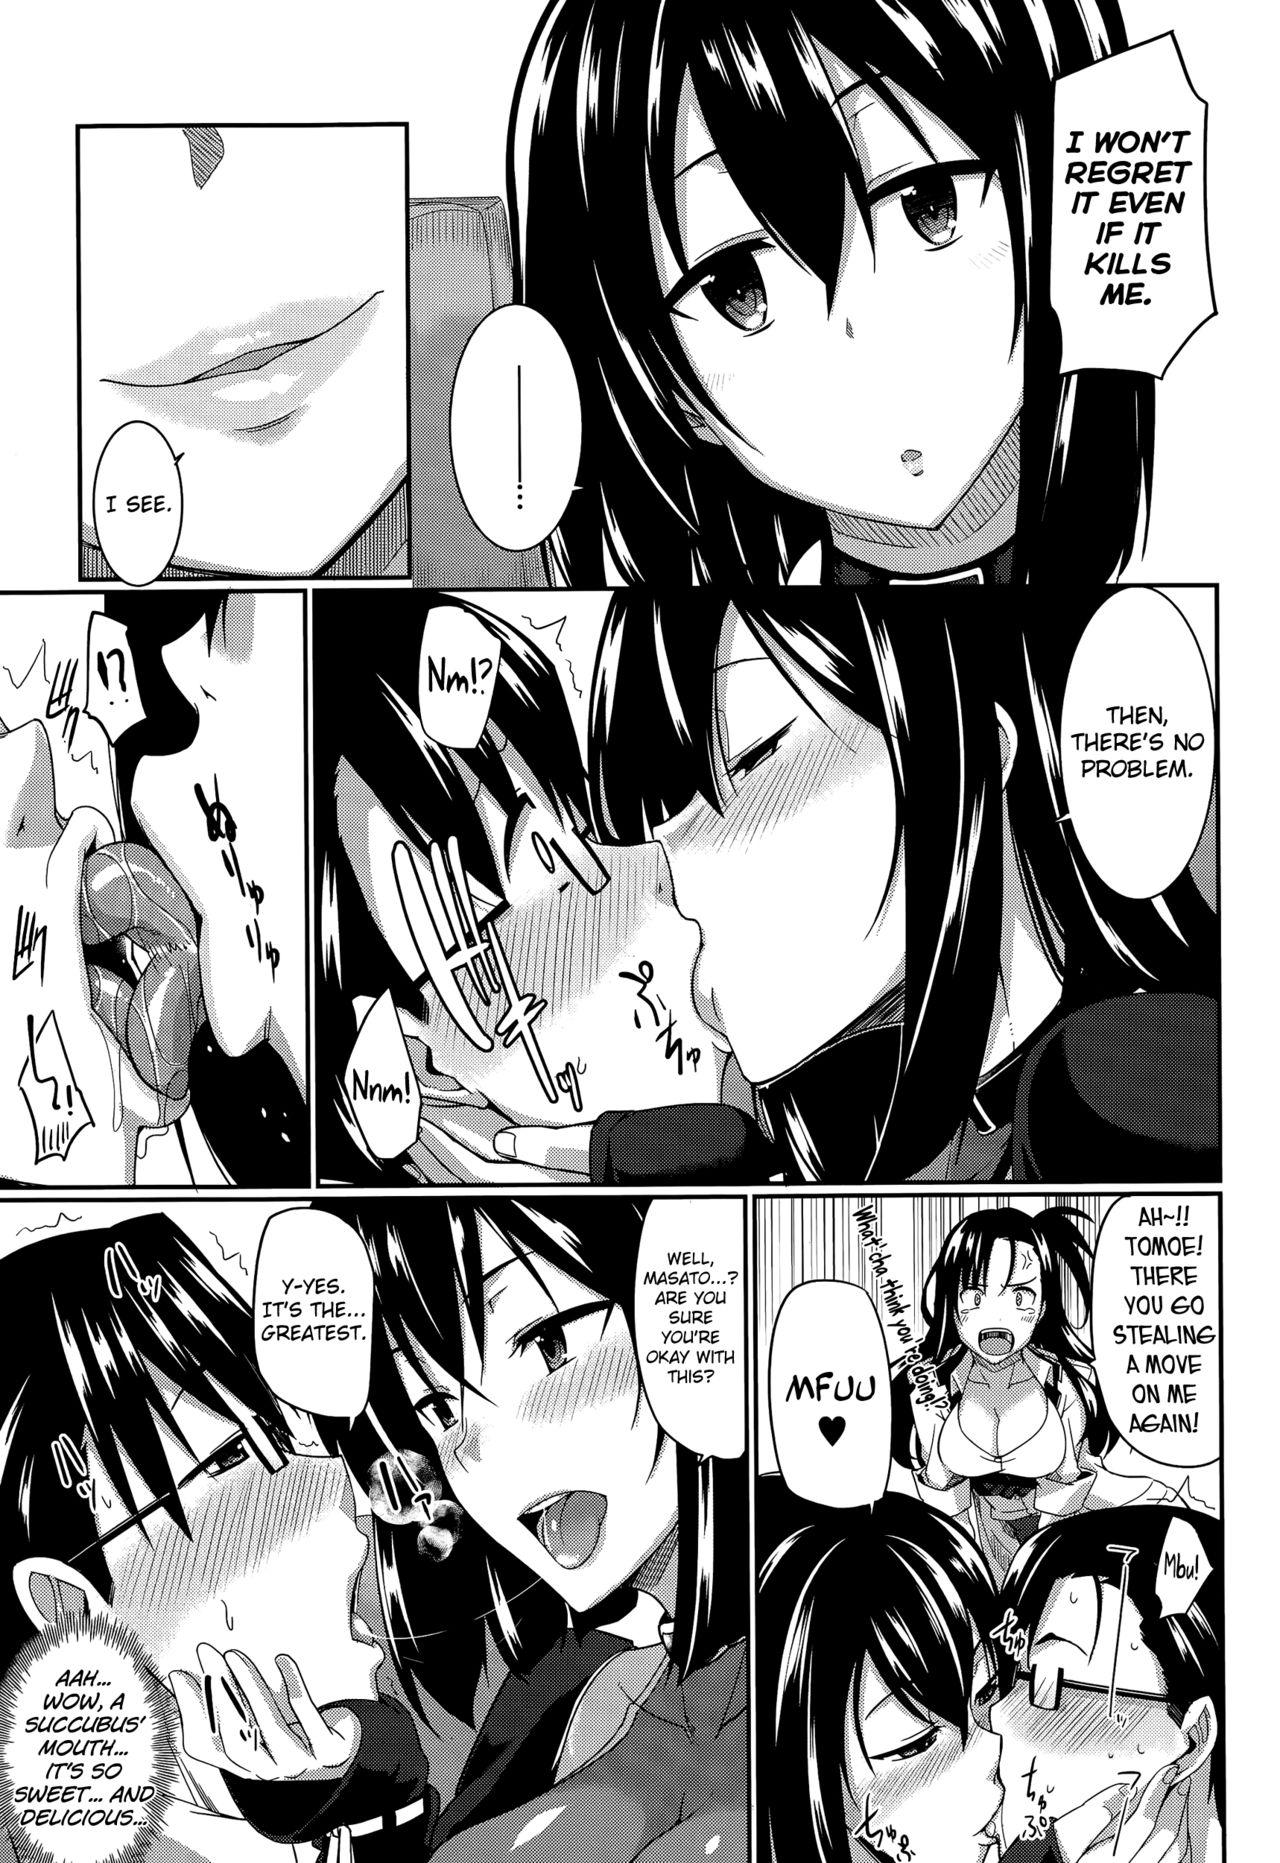 Bear Inma no Mikata! | Succubi's Supporter! Adult Toys - Page 11